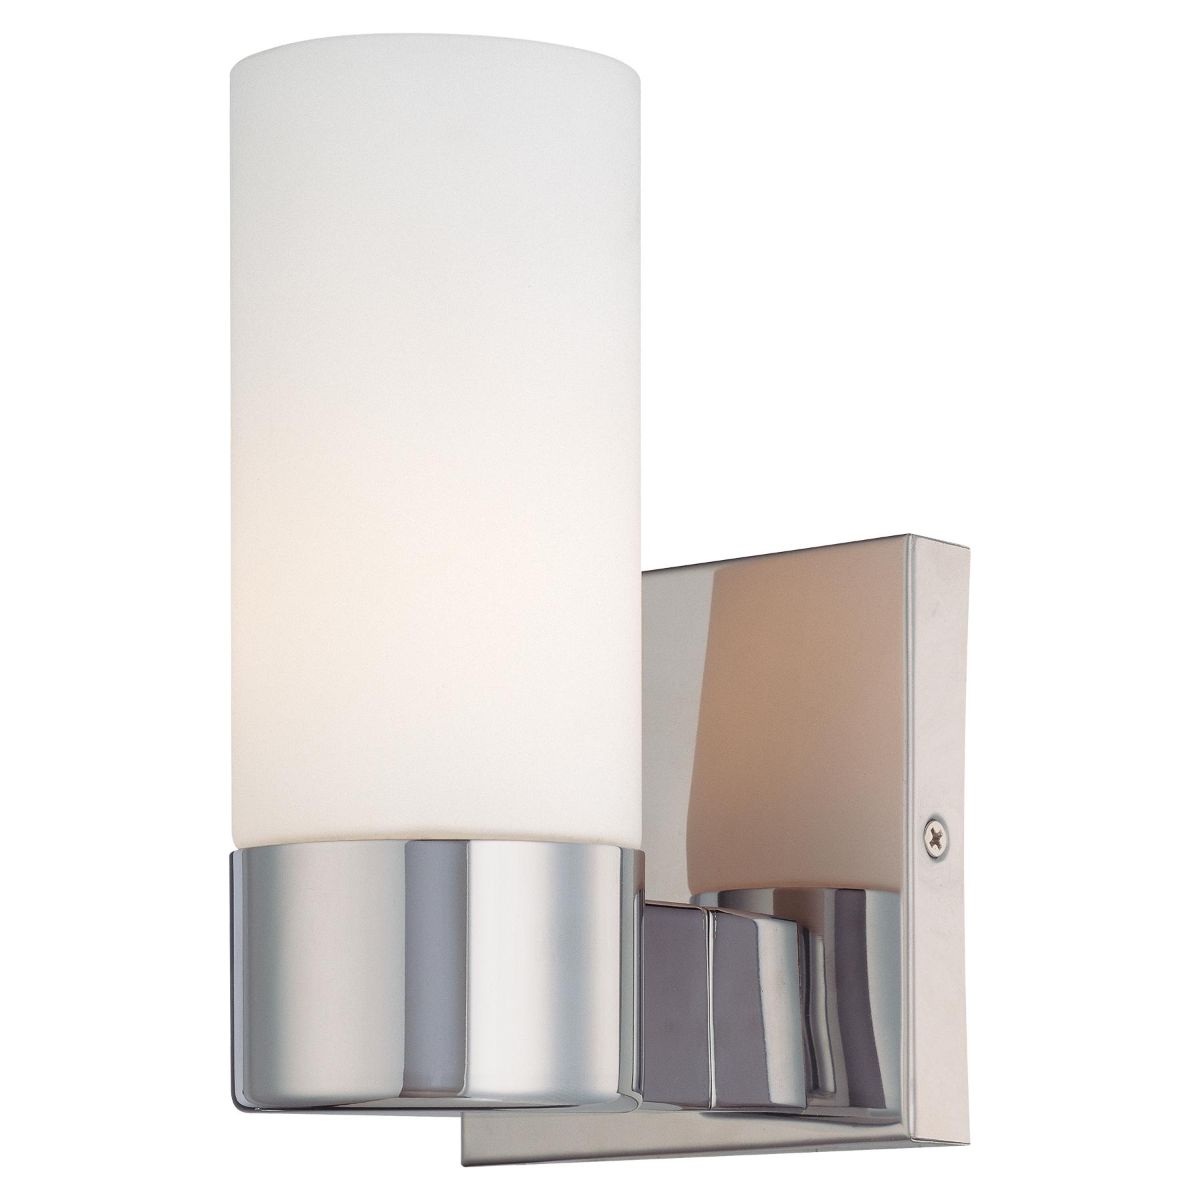 8 in. Wall Sconce Chrome finish